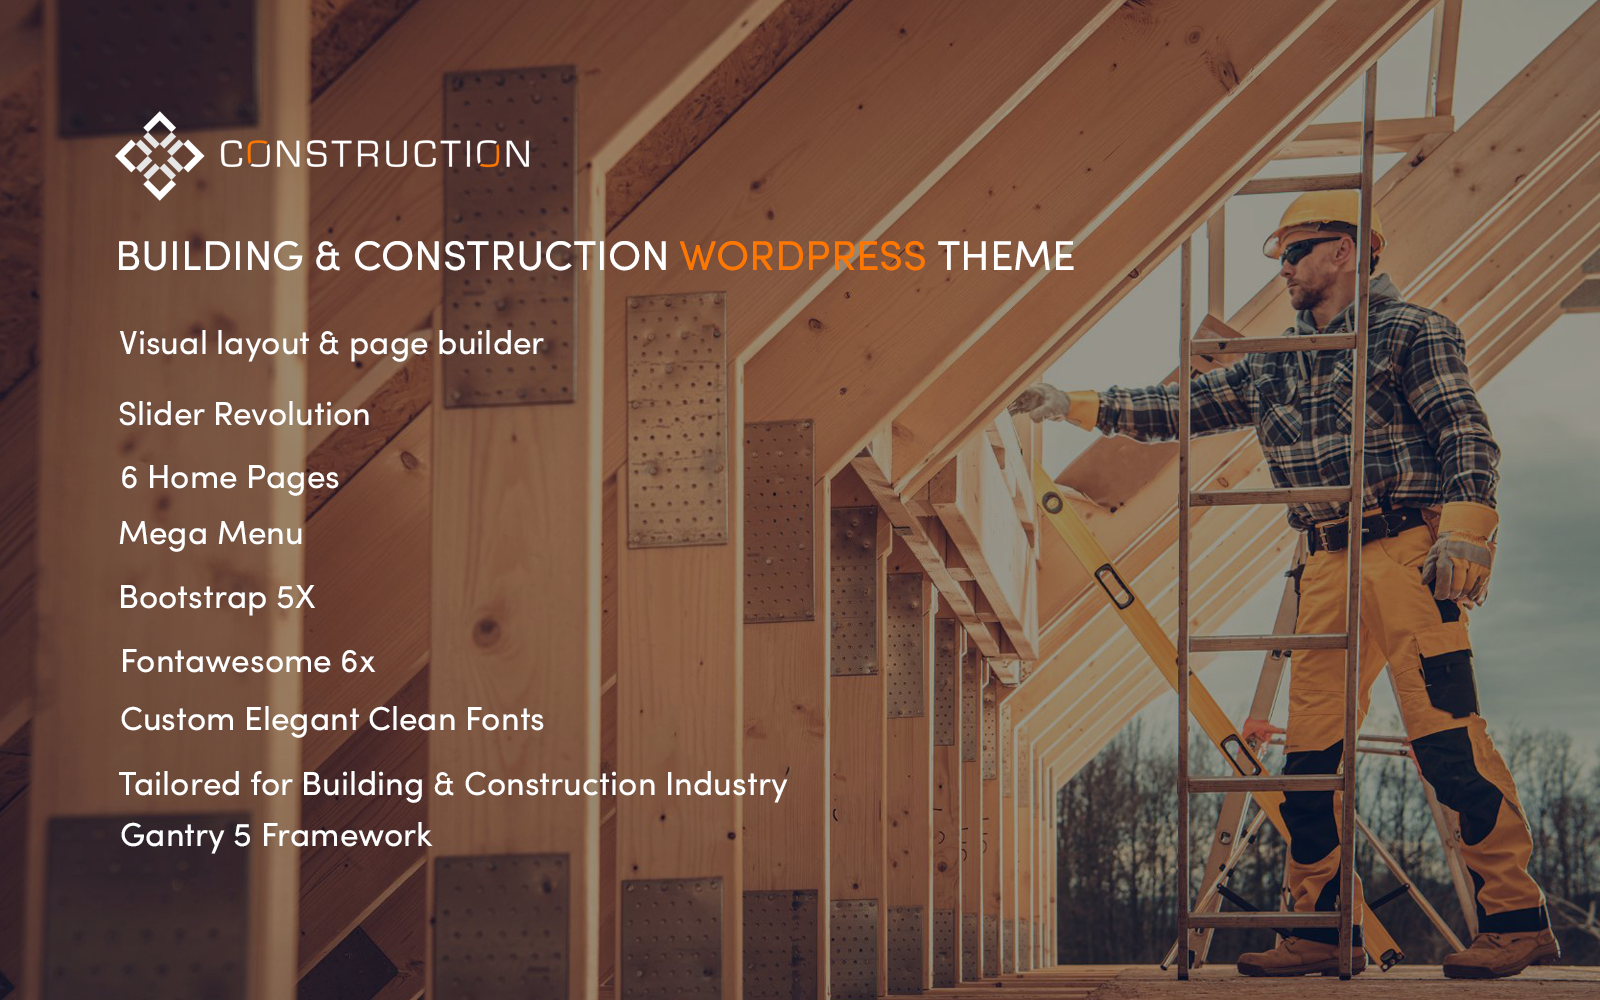 Builder Building and Construction Architecture WordPress Theme